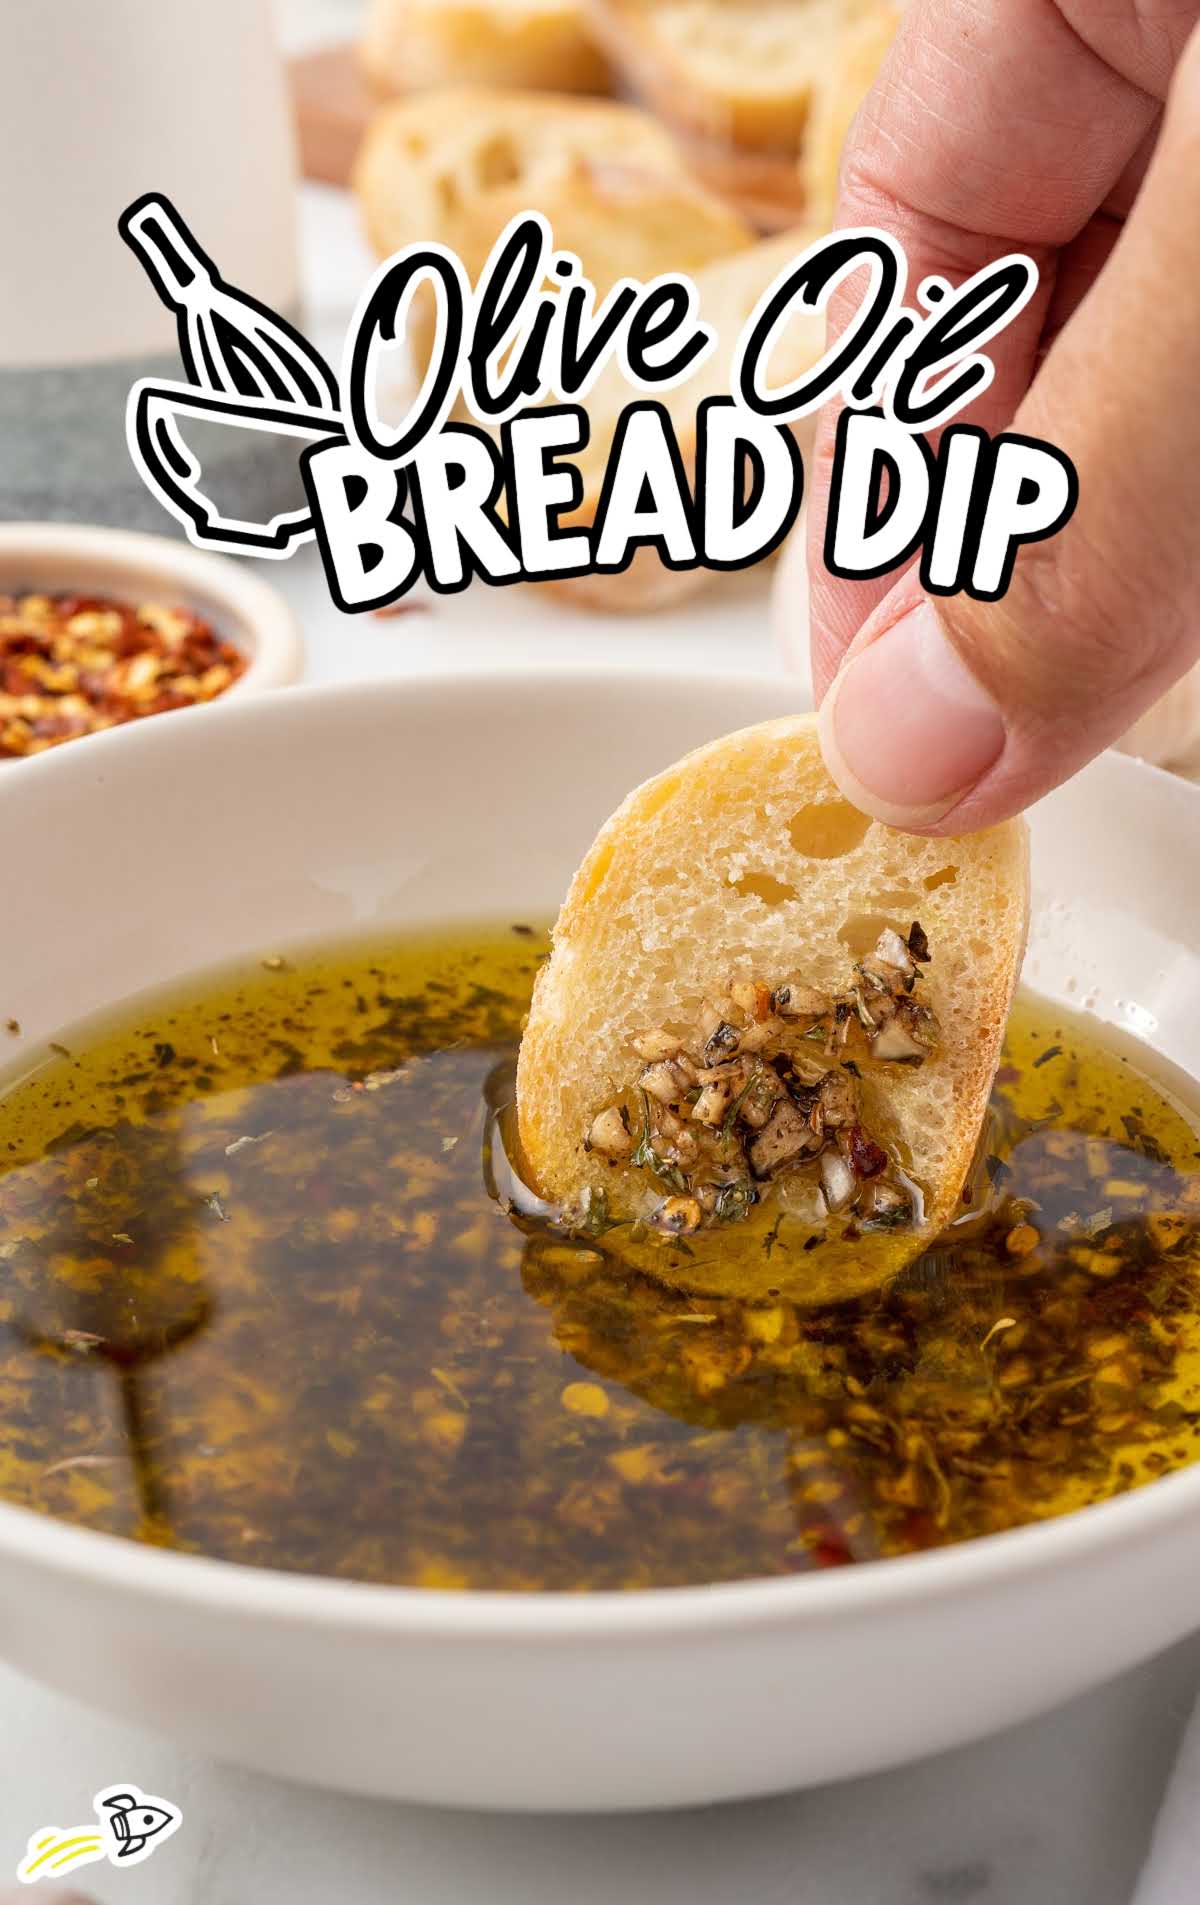 a slice of bread dipped in a bowl of olive oil